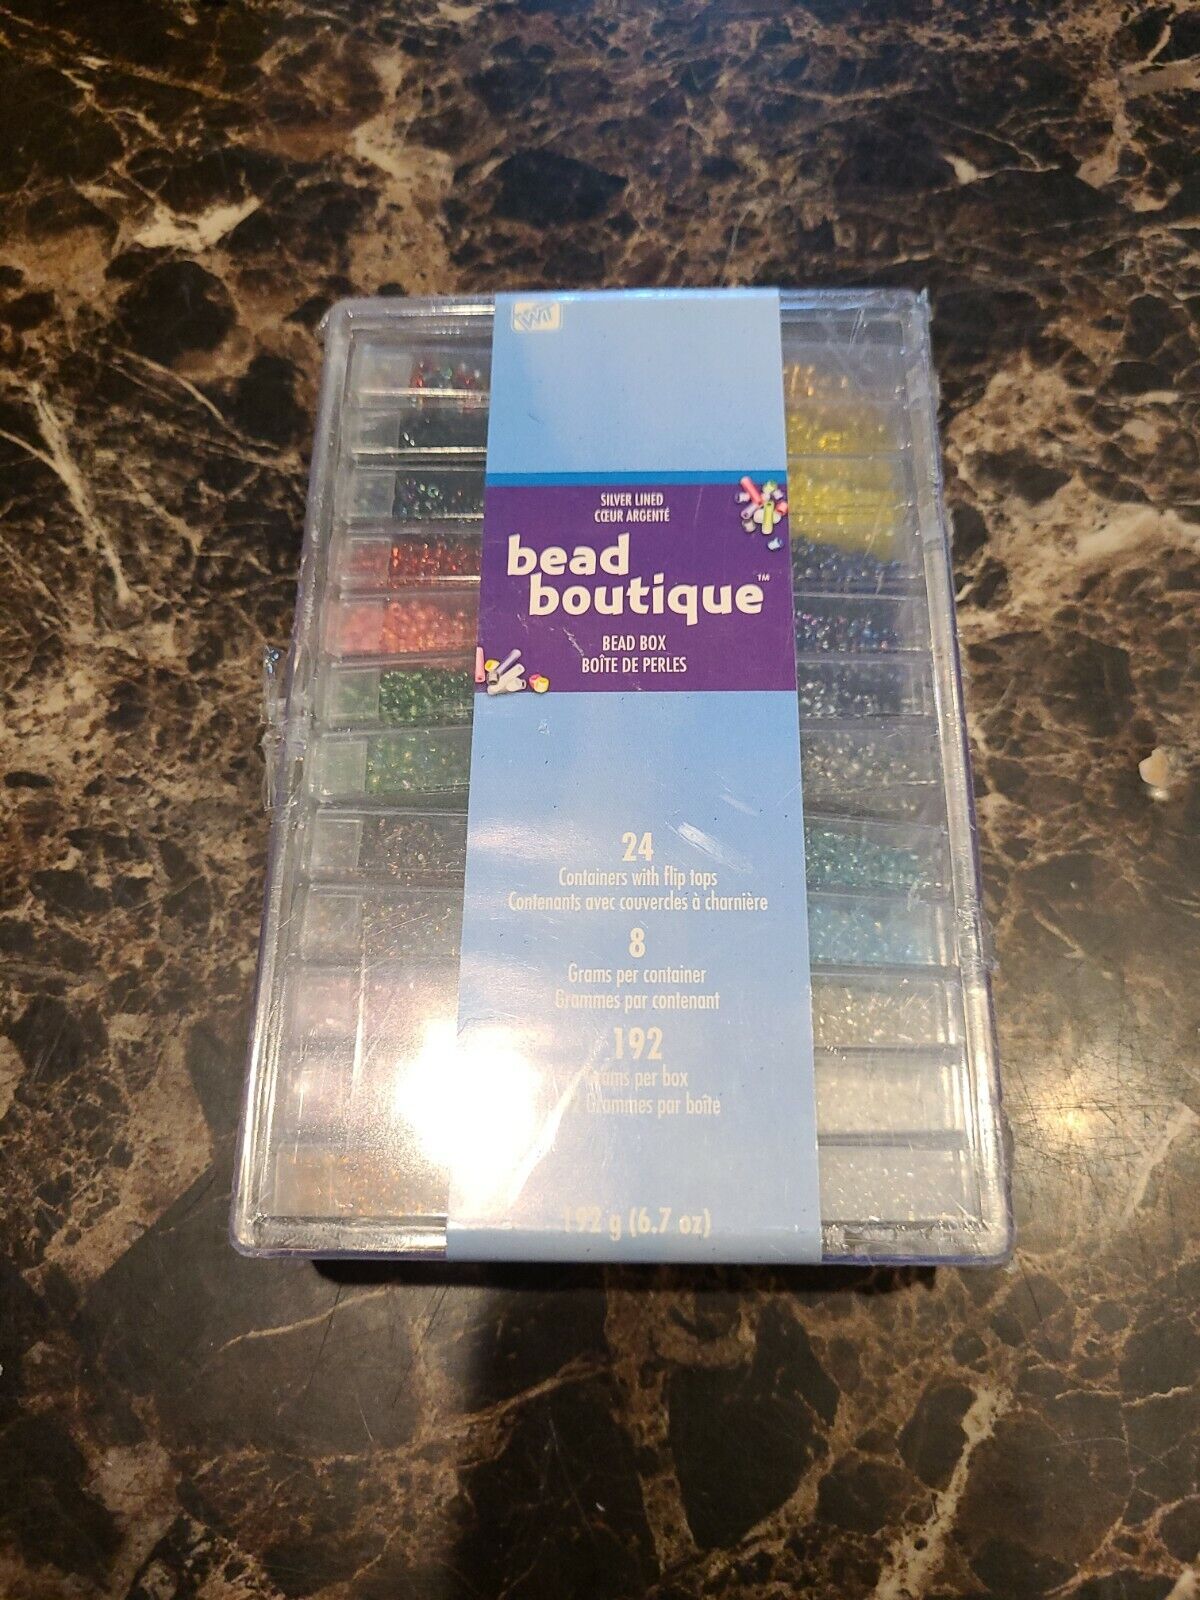 FACTORY SEALED Bead Boutique Bead Box Bugle Beads Westrim Crafts 24 Colors